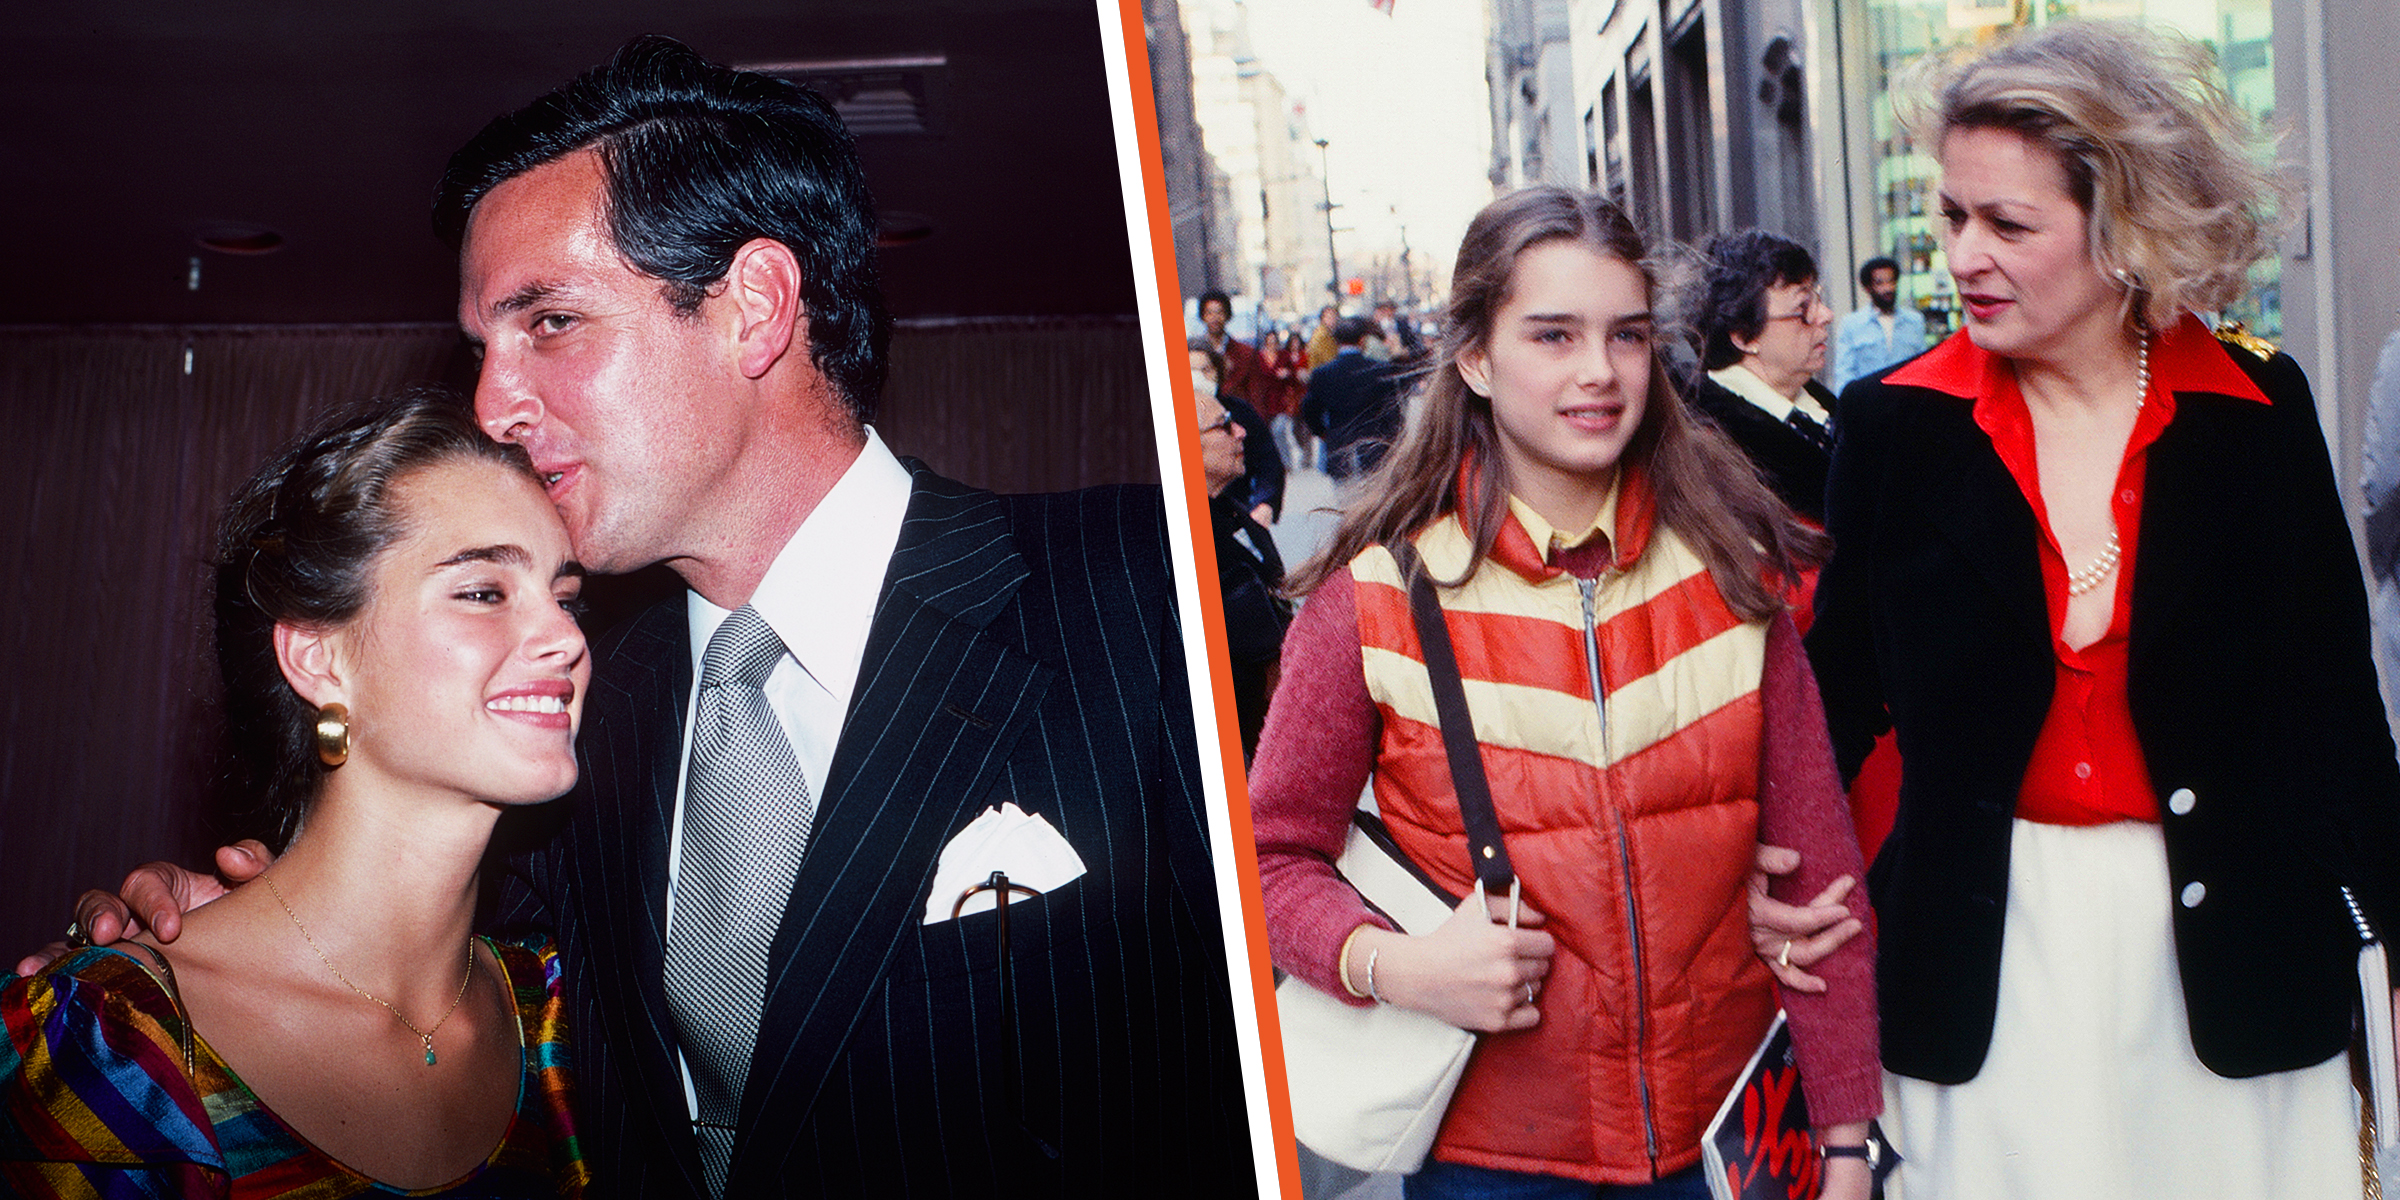 Brooke Shields with Frank Shields | Brooke Shields with Teri Shields | Source: Getty Images